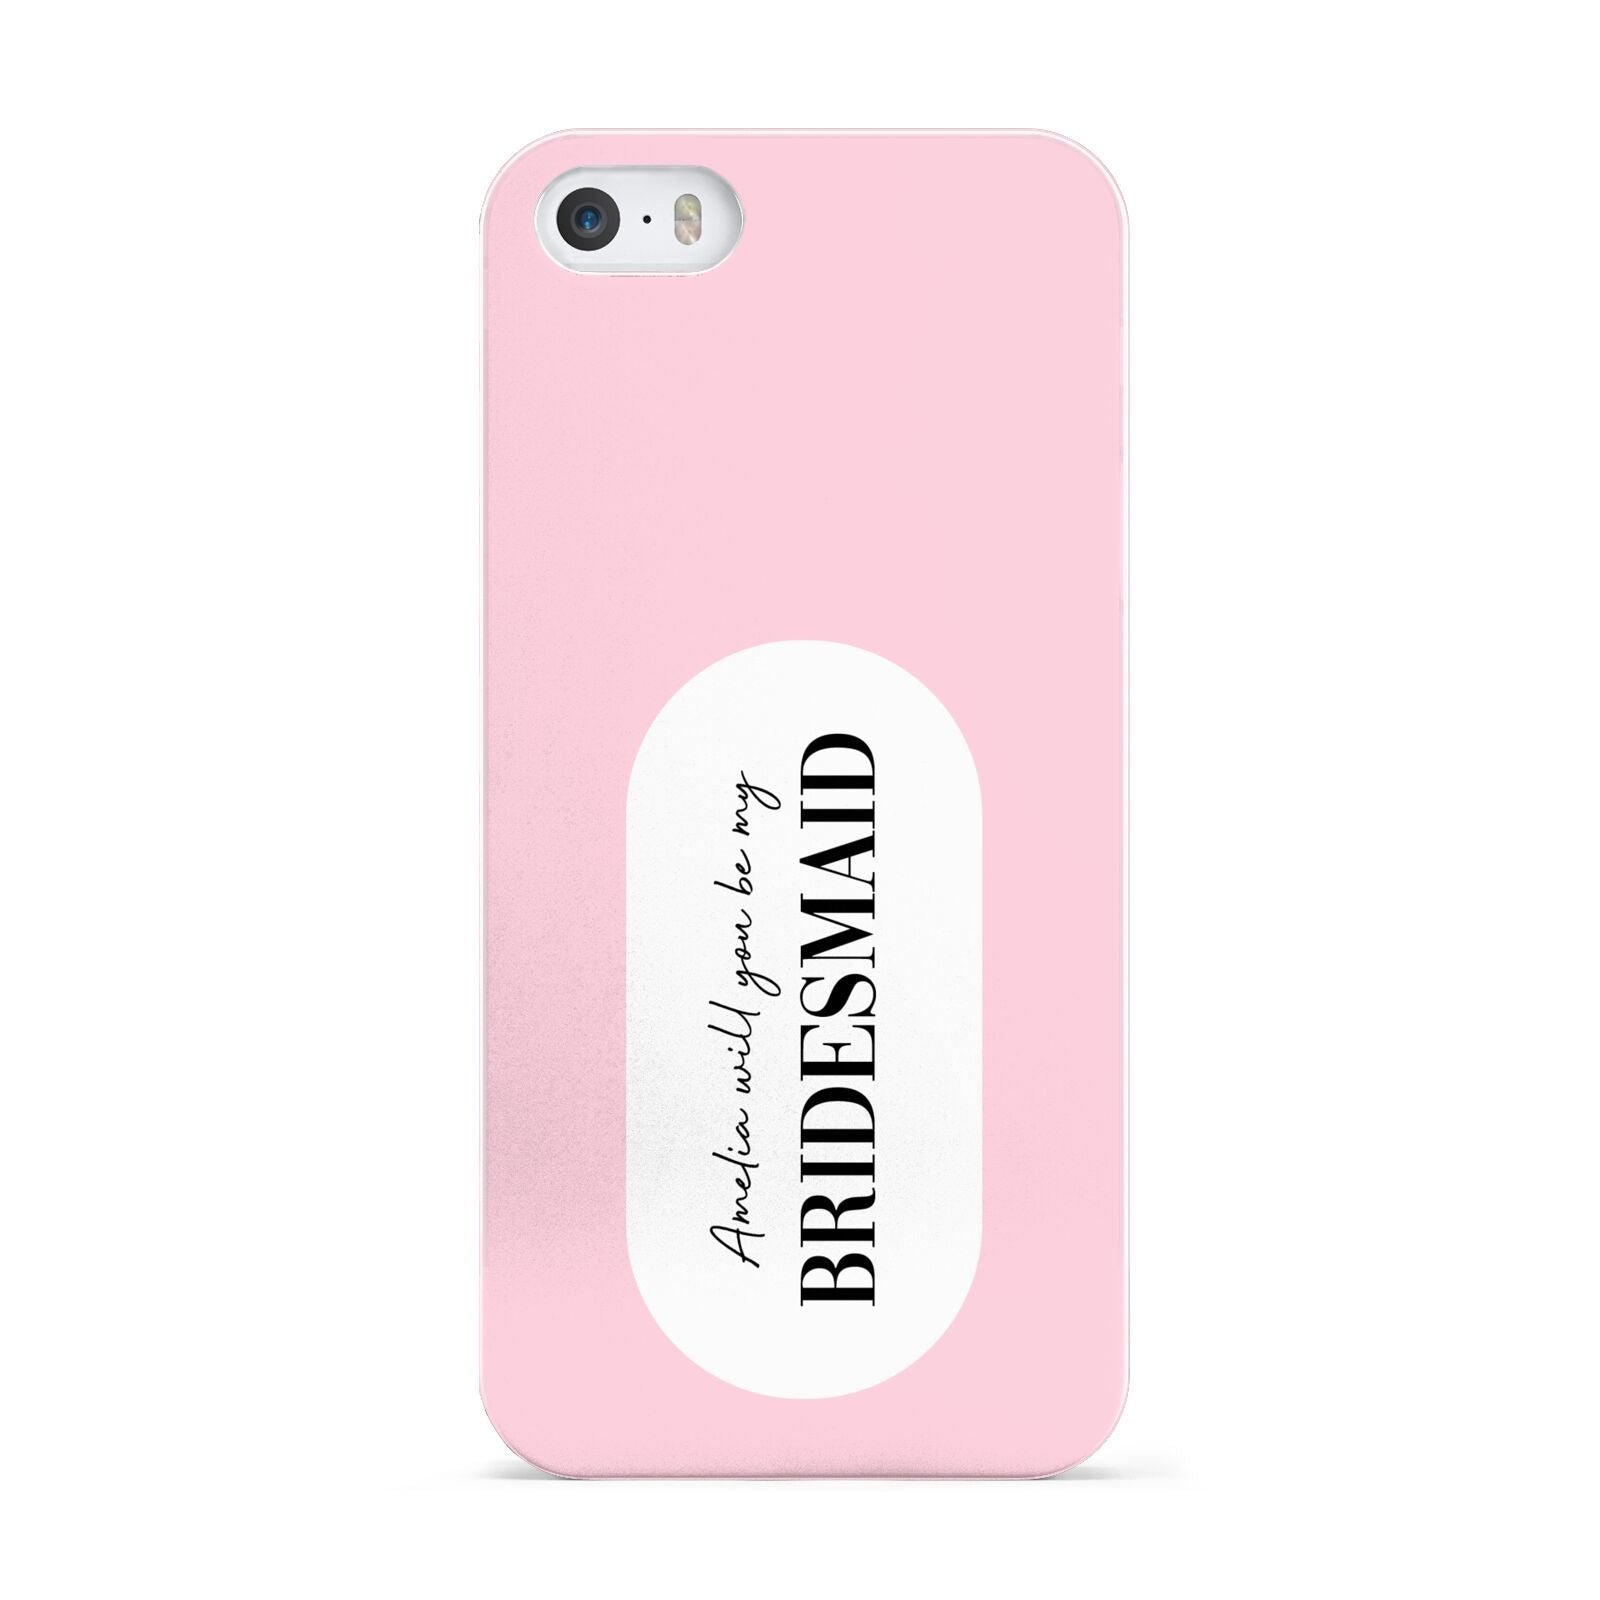 Will You Be My Bridesmaid Apple iPhone 5 Case